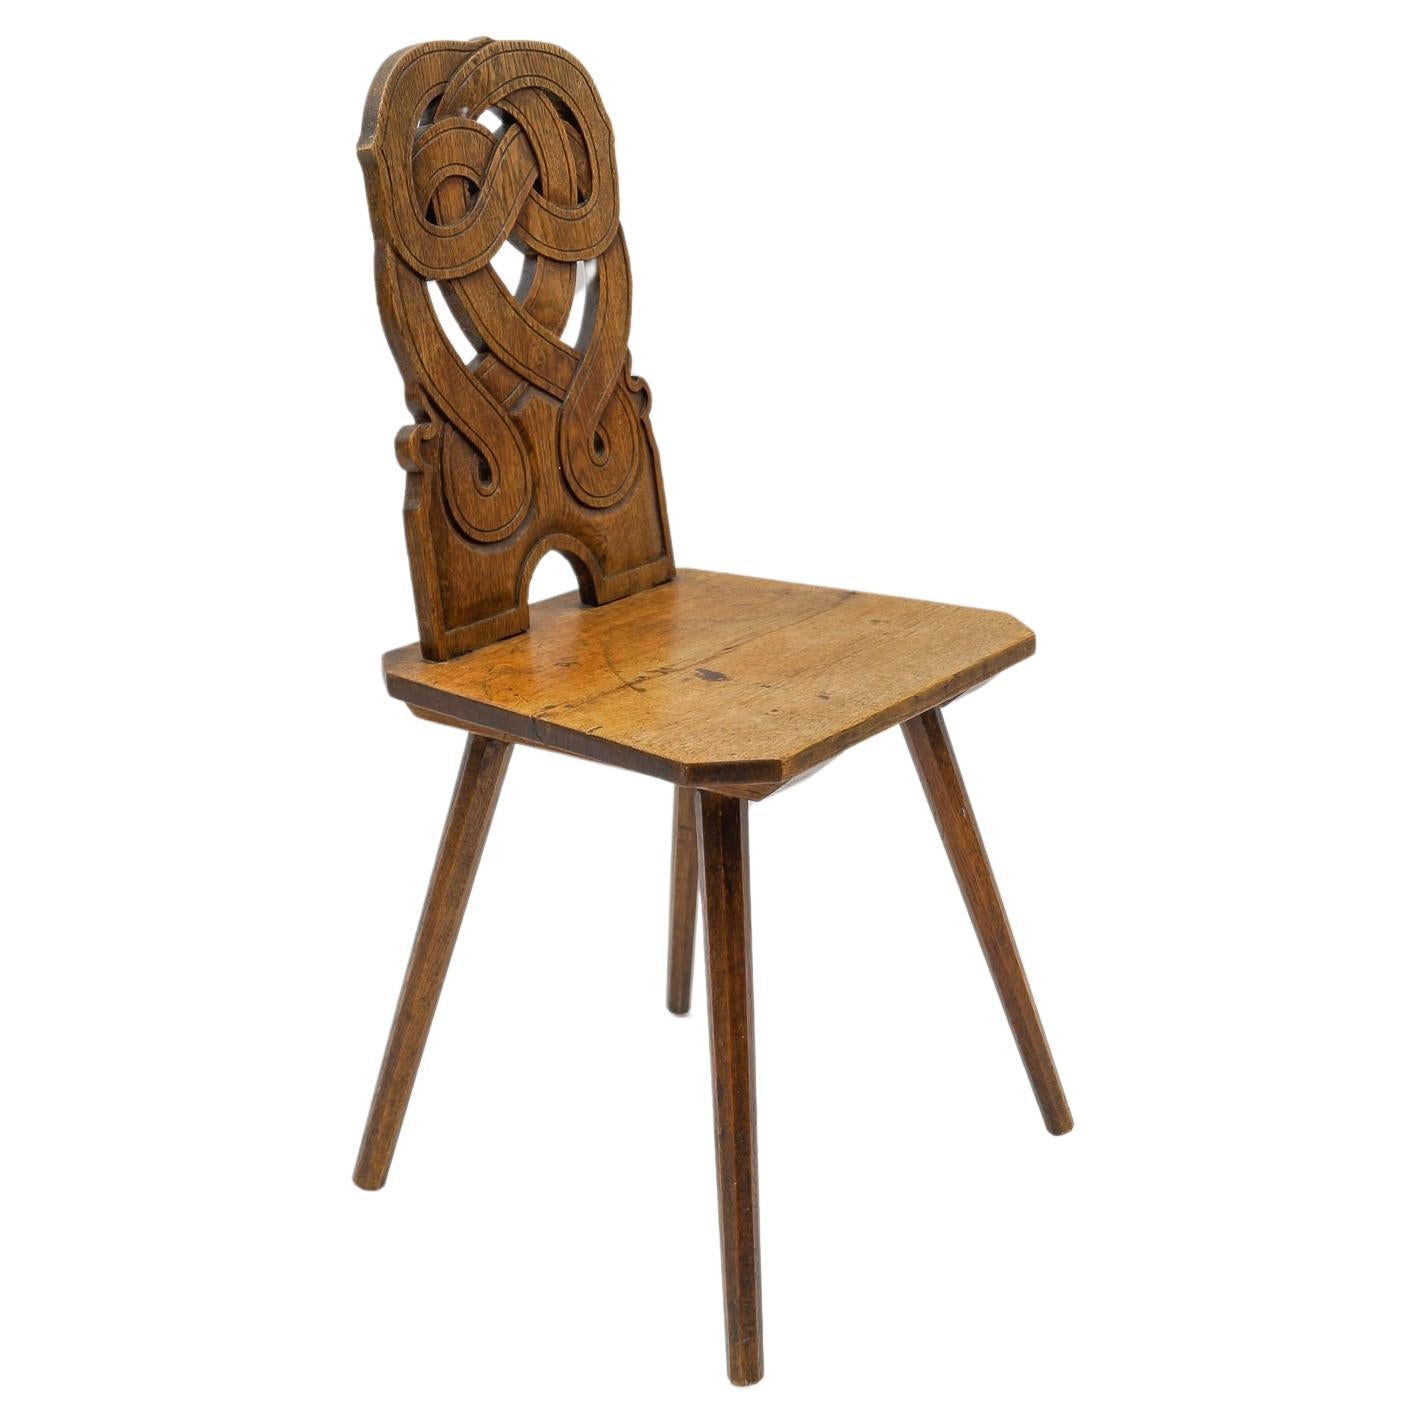 Alsatian chair with interlacing pattern on the back, France 1930s